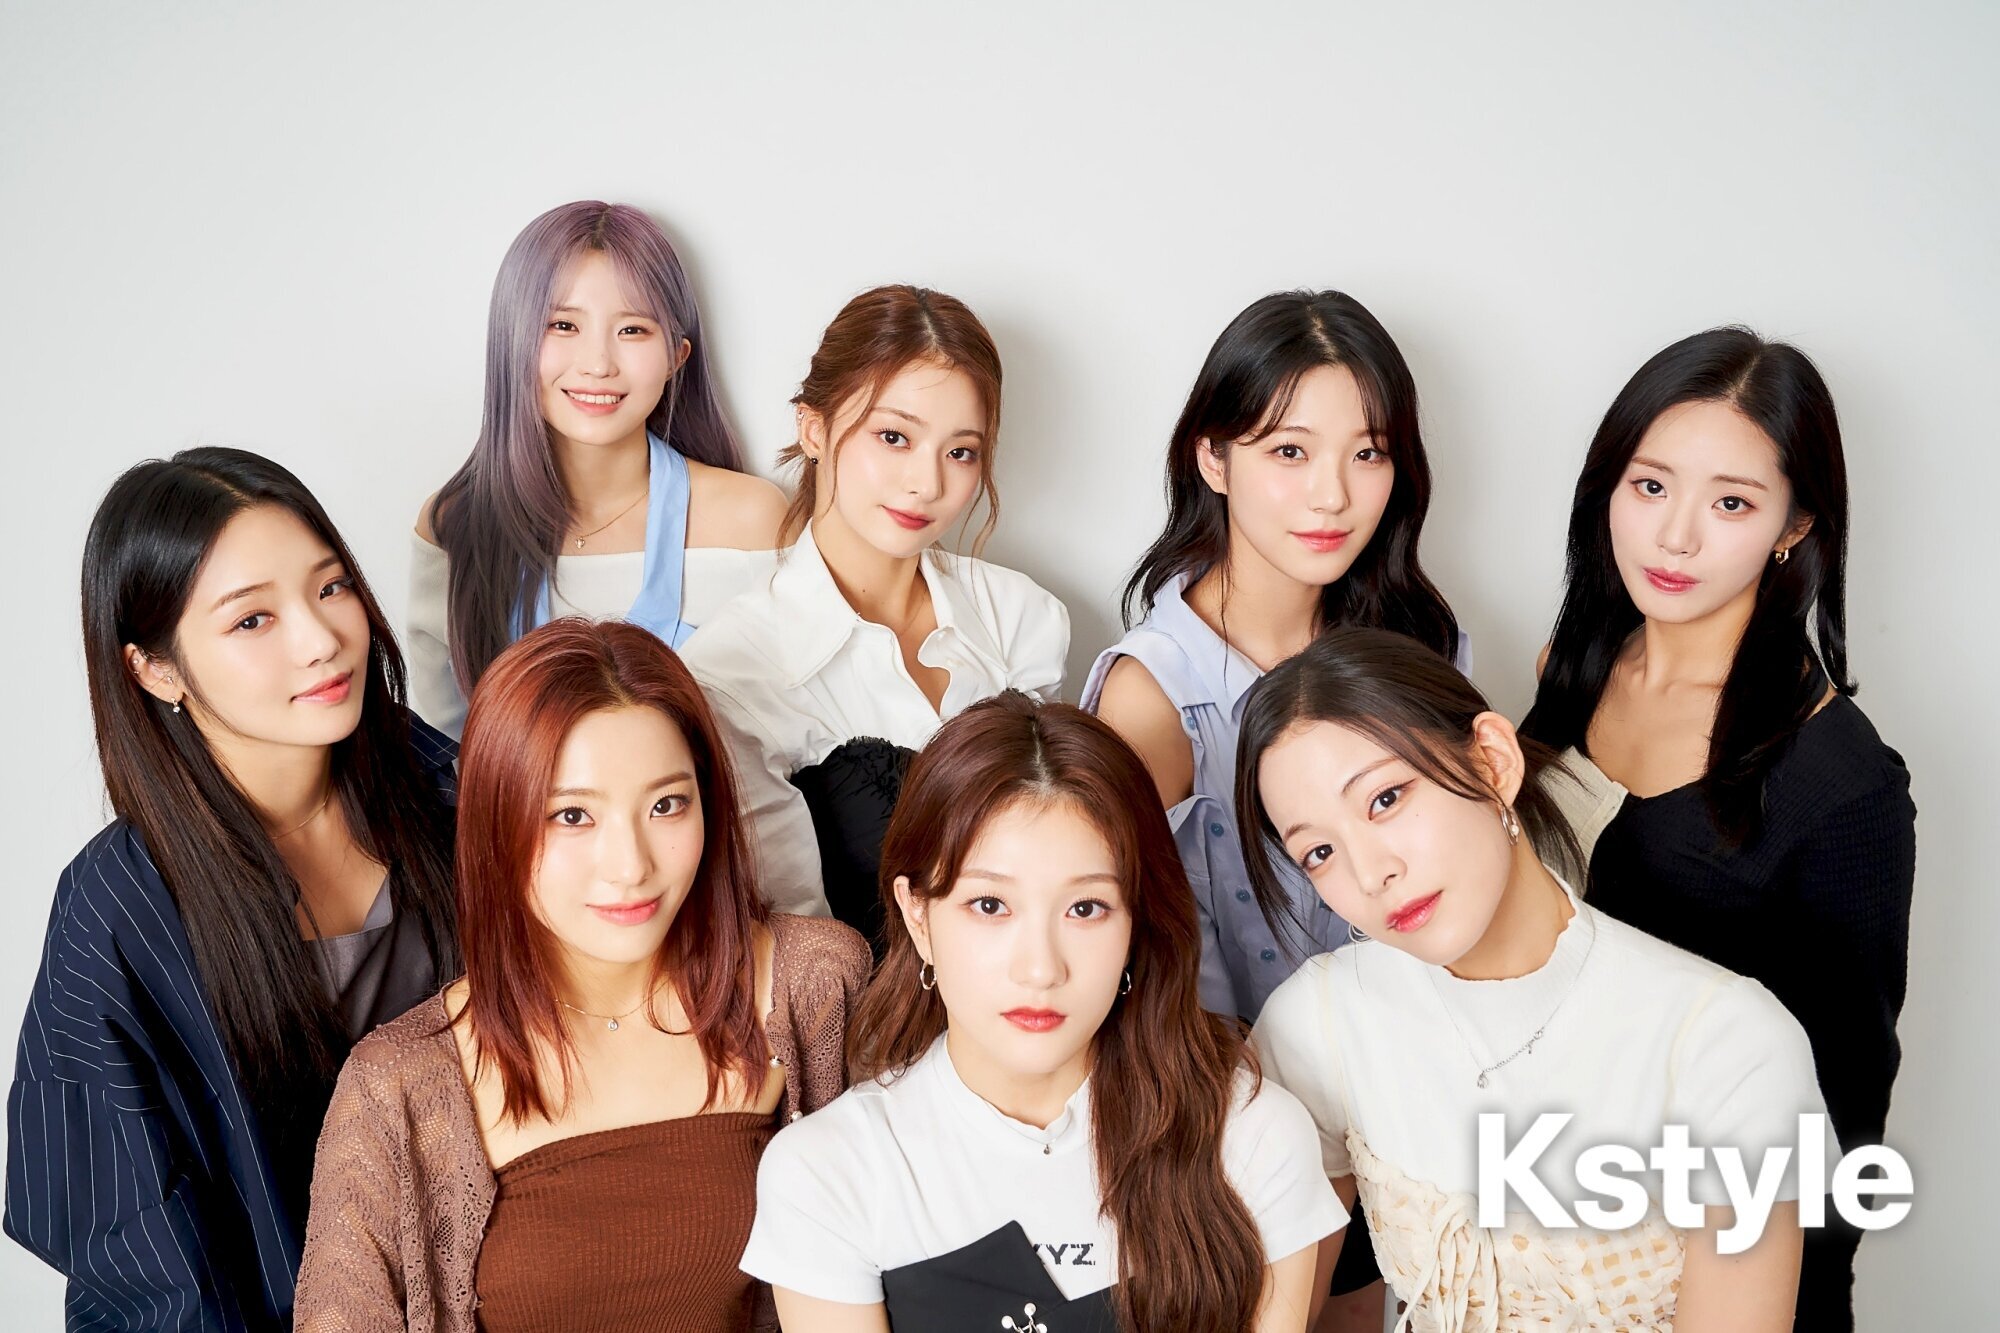 221202-fromis-9-Interview-with-Kstyle-documents-8.jpeg?v=ba791